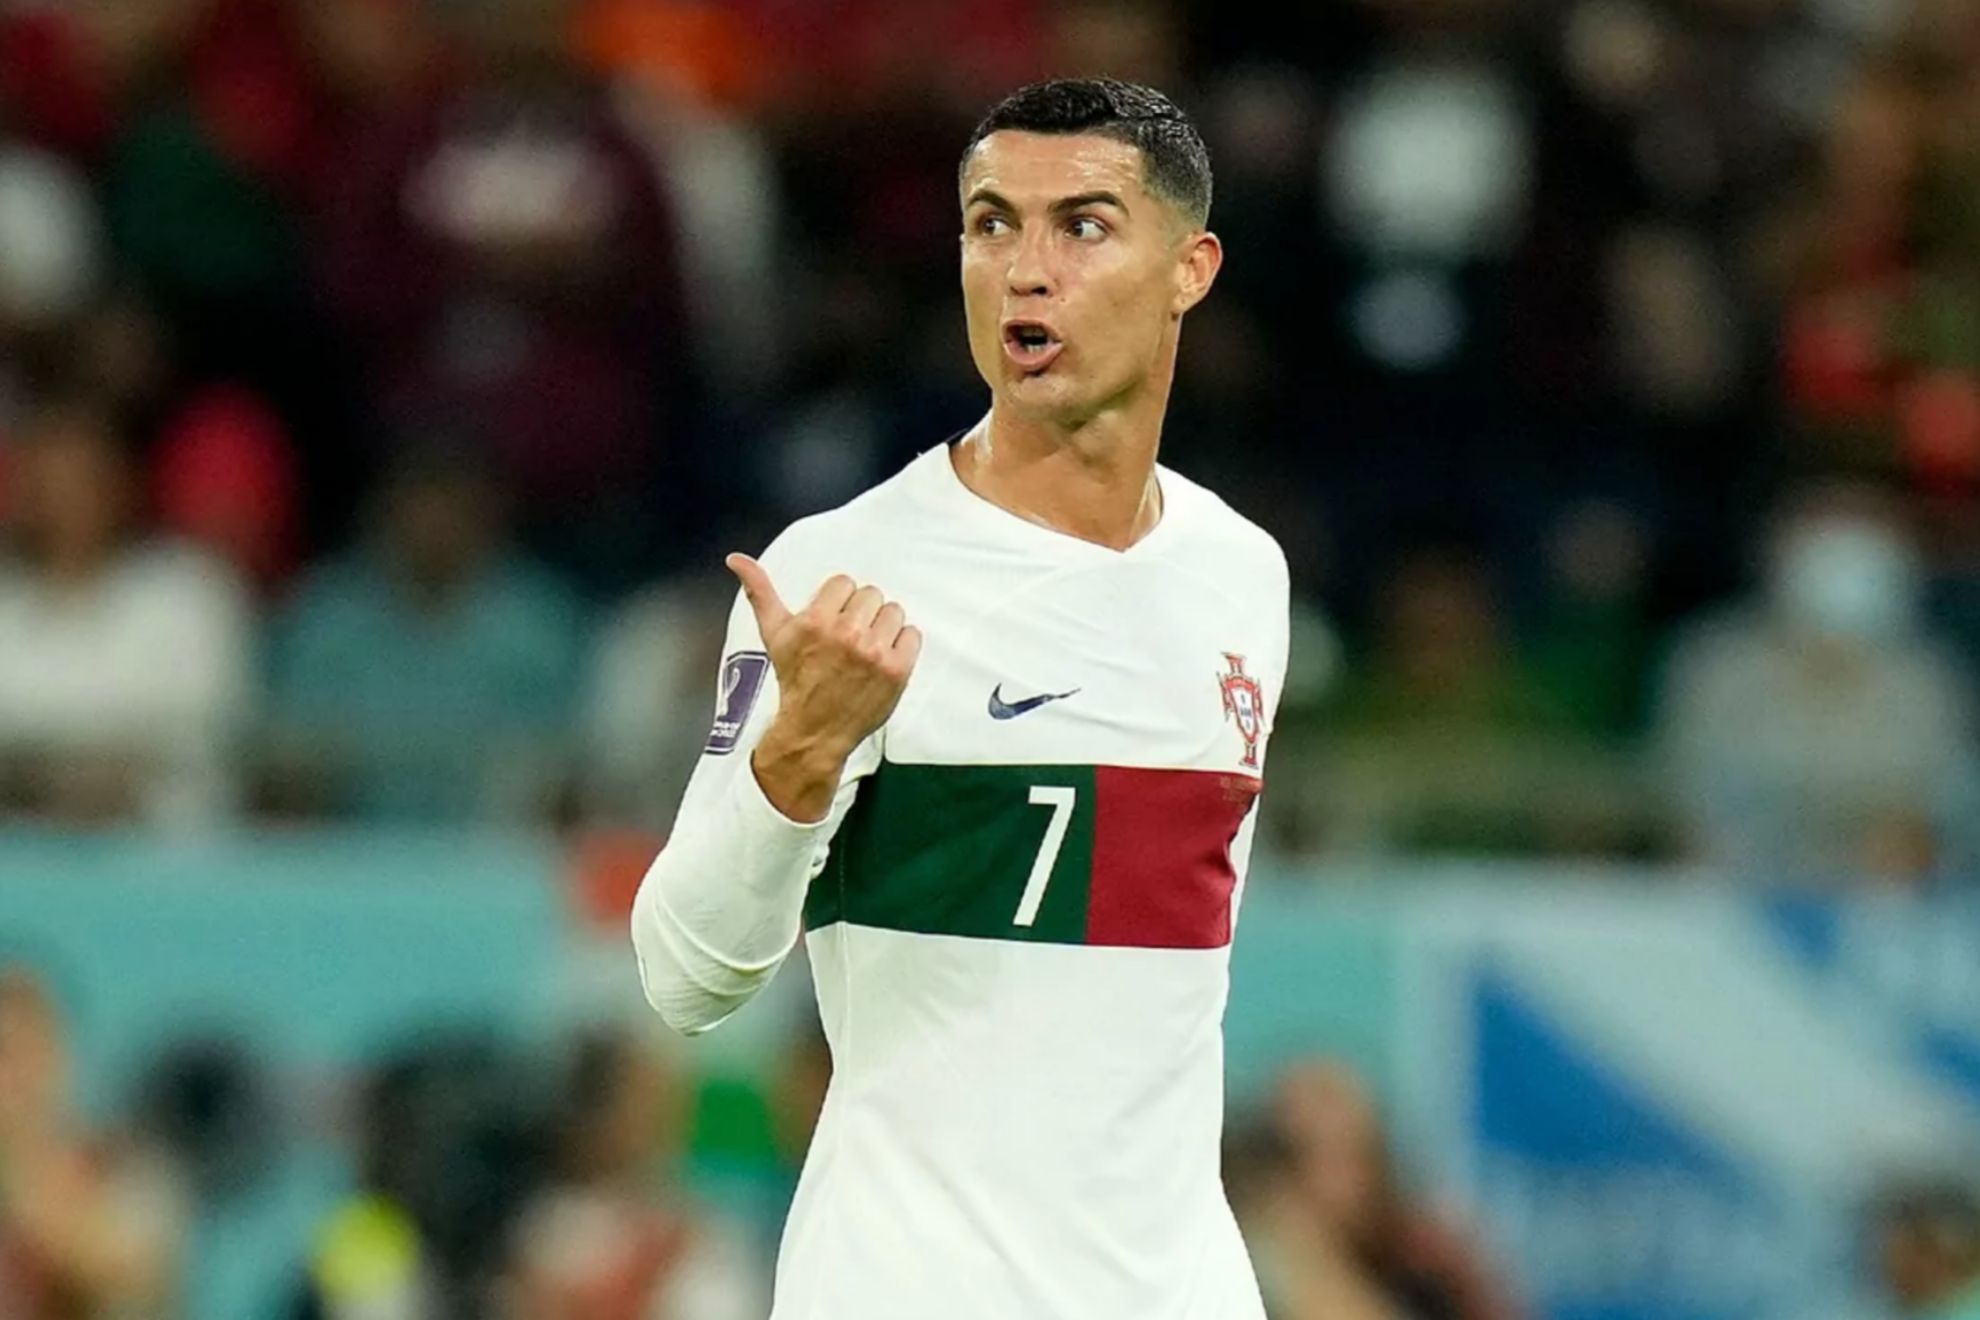 Details leaked about Cristiano Ronaldo's possible return to